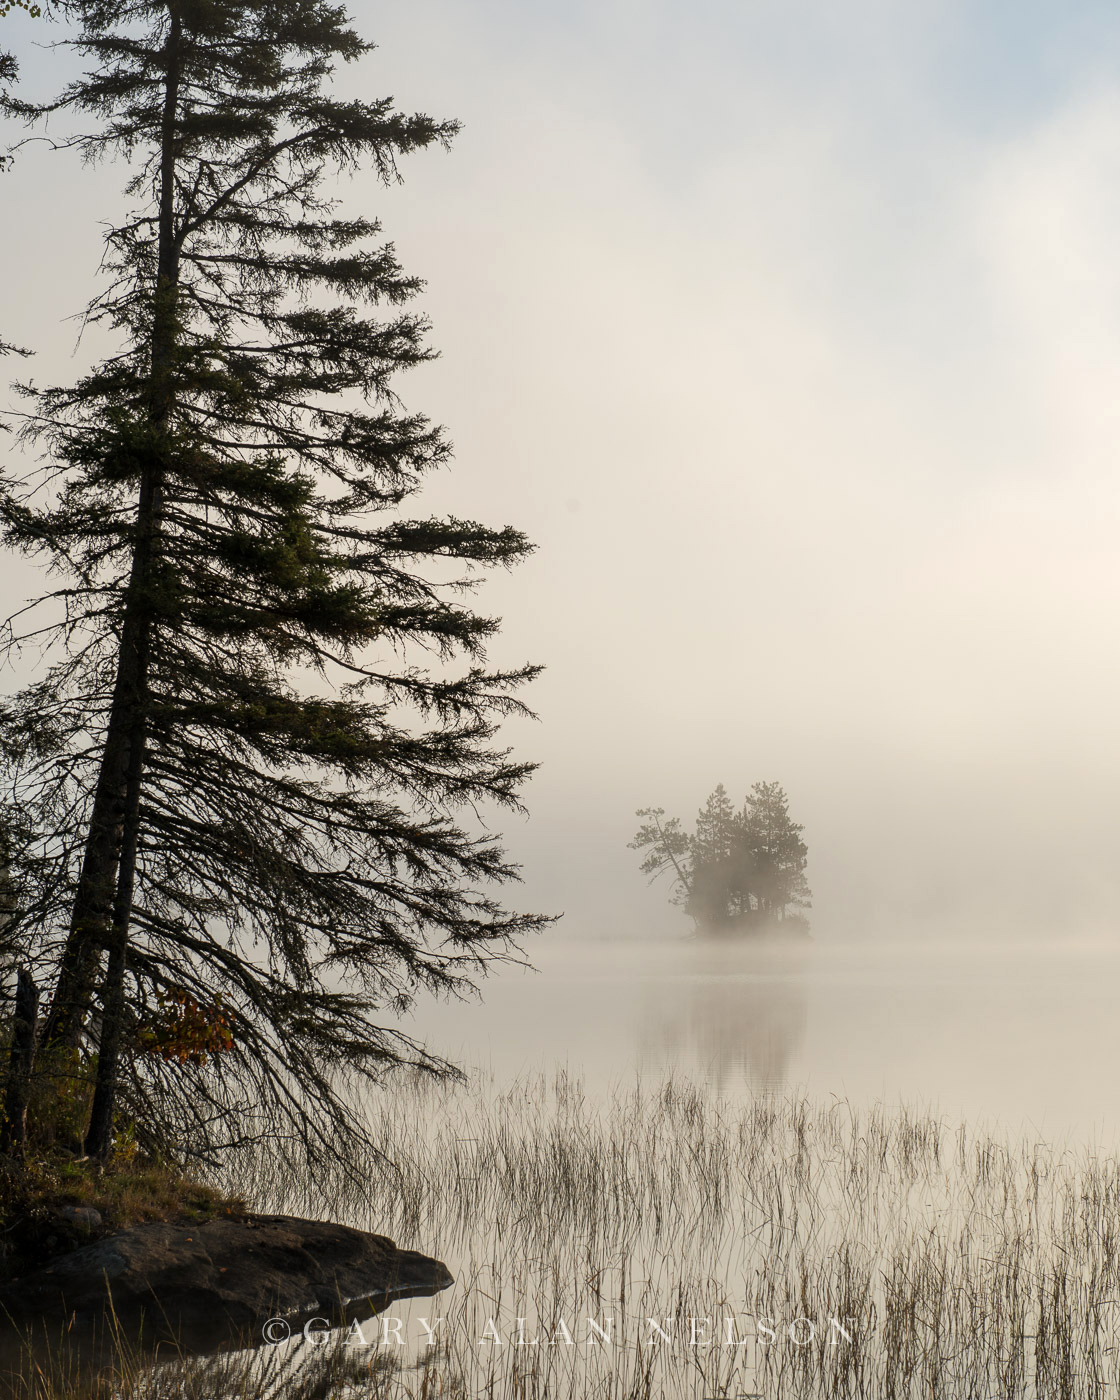 Island in fog, at dawn, Superior National Forest, Minesota